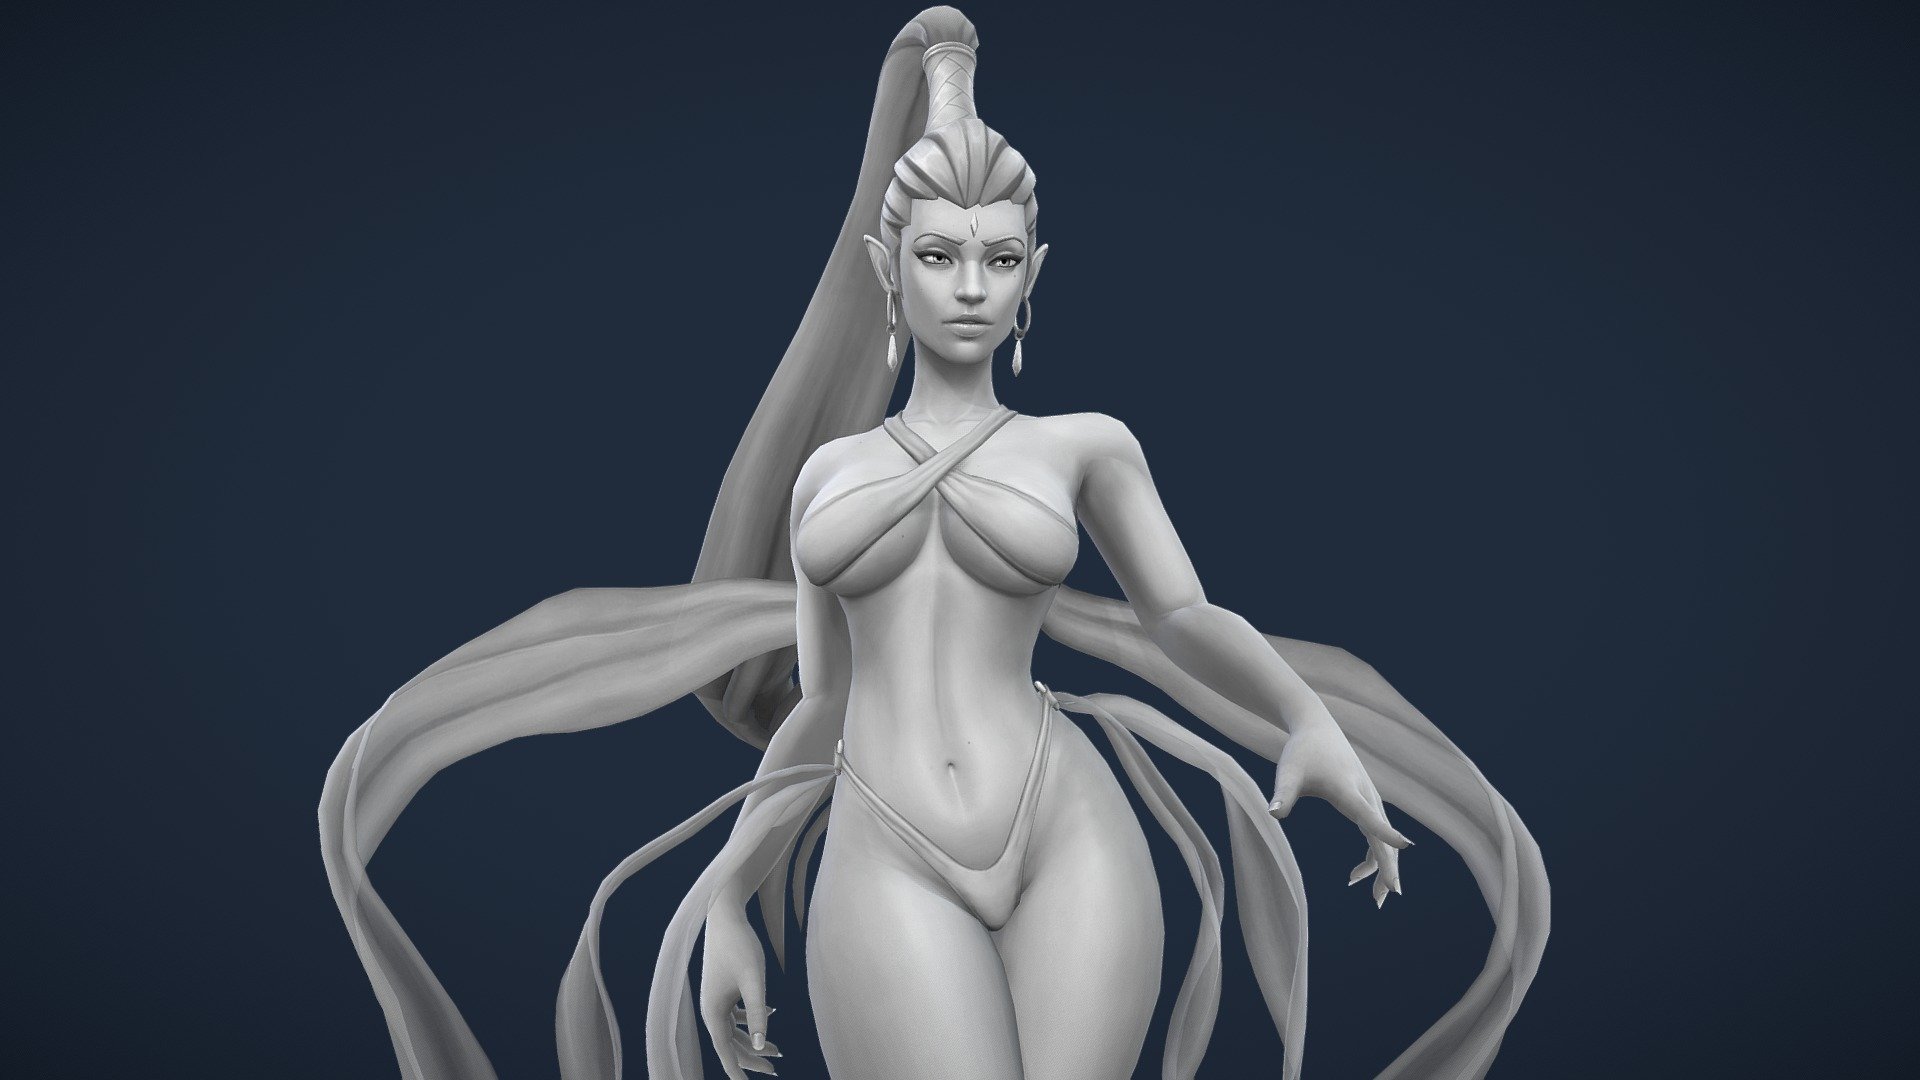 I'm a big fan of Final Fantasy VII, so I decided to do this model based from the original design of shiva´s summon that appeared in Final Fantasy VII on the PSX.
Made in my free time to practice with handpainted textures in 3dCoat.

See more in https://www.artstation.com/artwork/klEYvz - Shiva - Diamond Dust - 3D model by Juan Manuel Pachón Maya (@jpachonmaya) 3d model